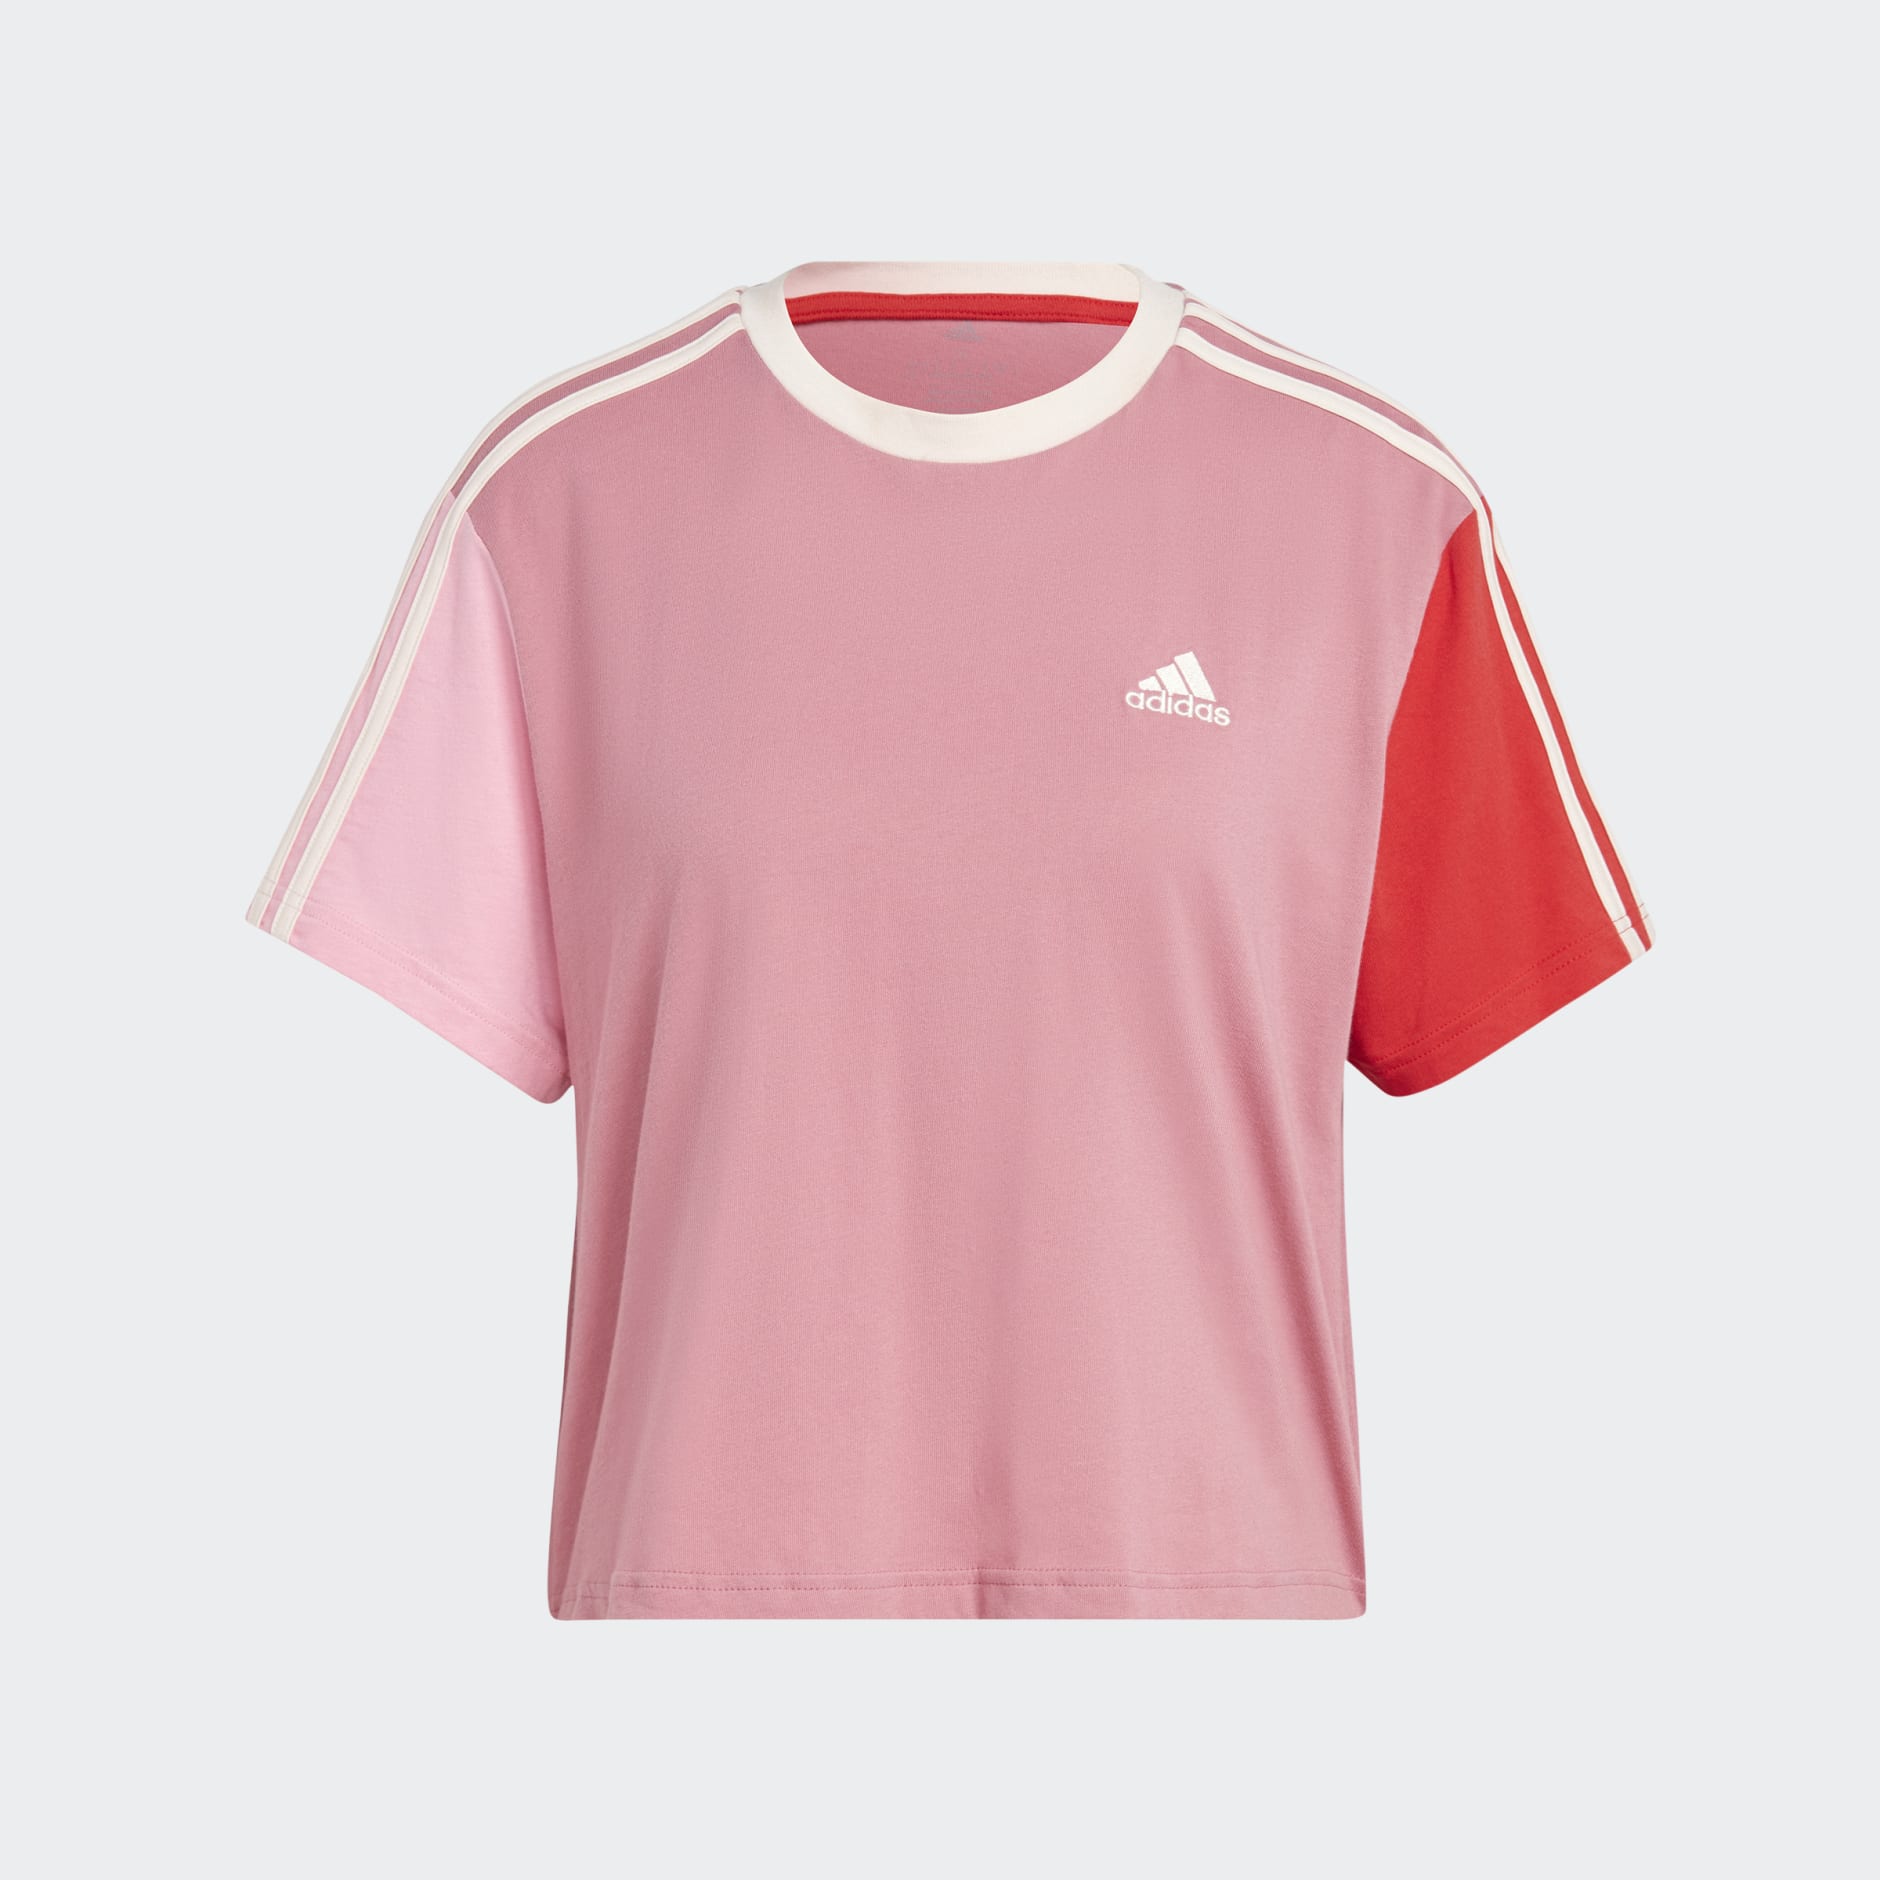 Crop adidas | Top - Egypt Jersey Single Clothing Women\'s 3-Stripes - Pink Essentials